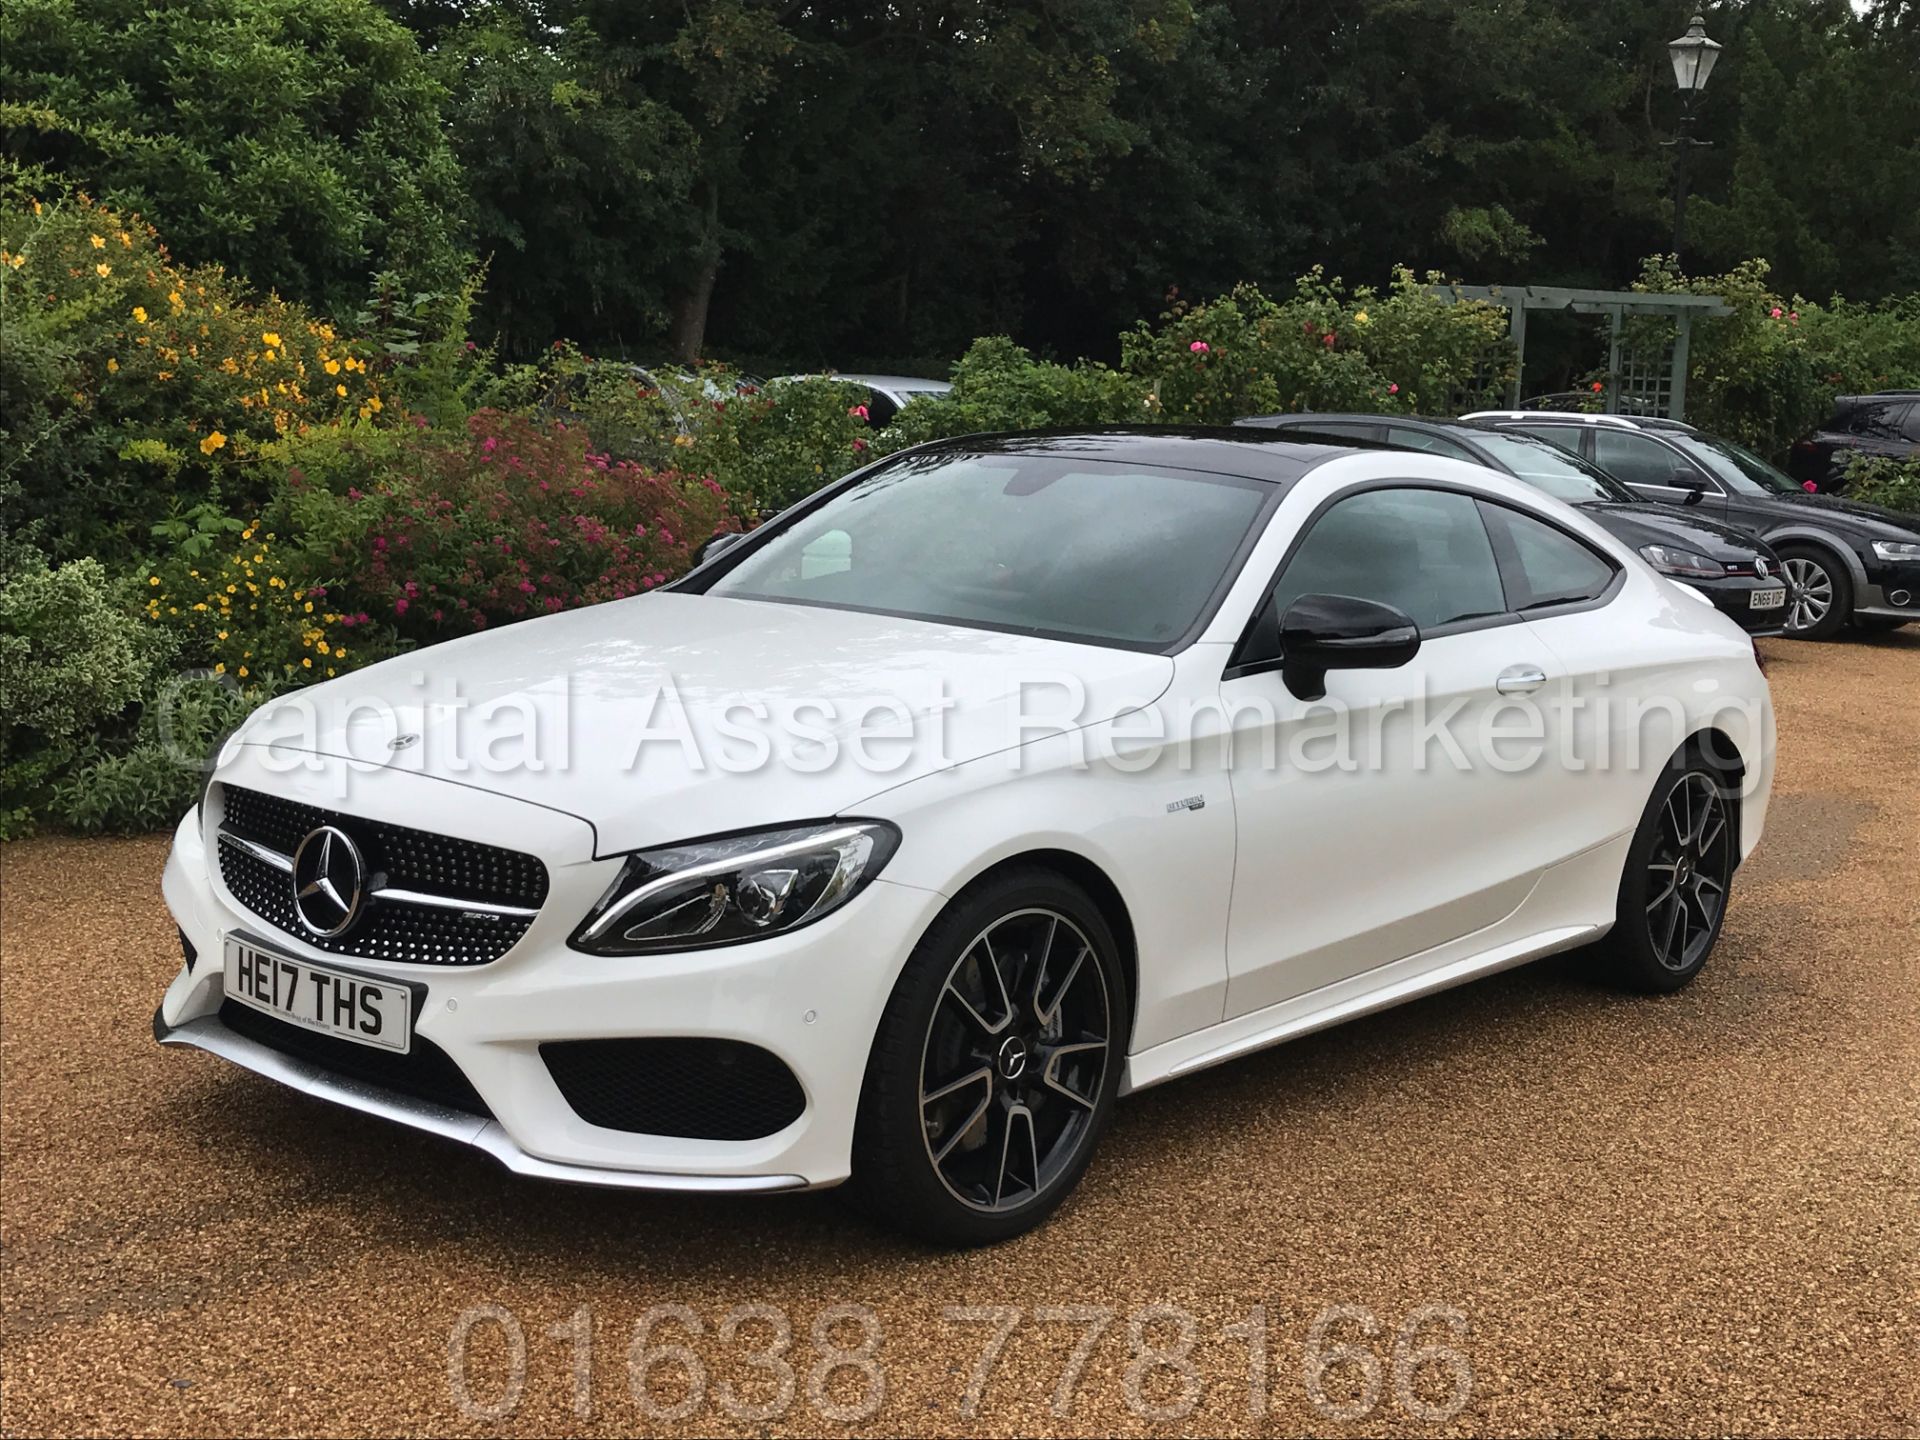 MEREDES-BENZ C43 AMG PREMIUM '4 MATIC' COUPE (2017) '9-G AUTO - LEATHER - SAT NAV' **FULLY LOADED** - Image 9 of 57